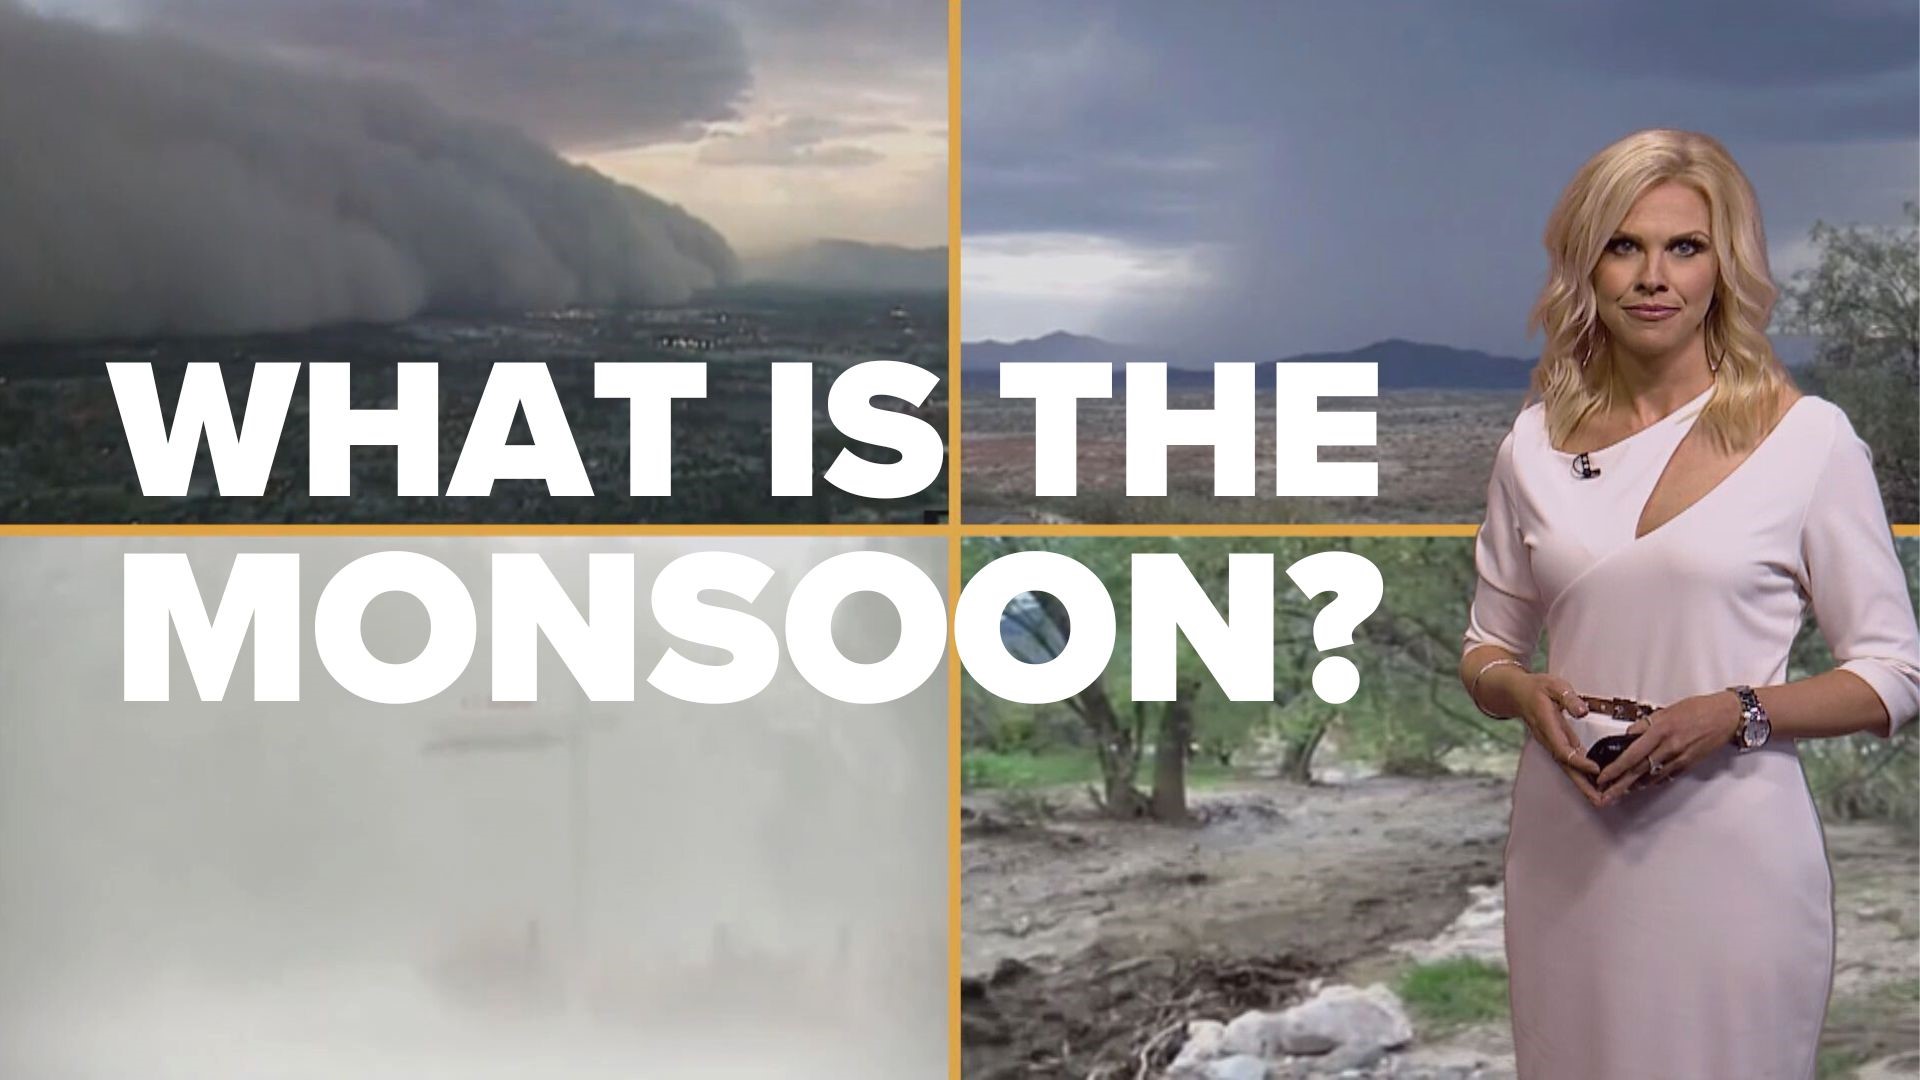 The monsoon is a unique weather phenomenon for Arizona. Krystle Henderson explains what the monsoon is and how it affects the Grand Canyon state.